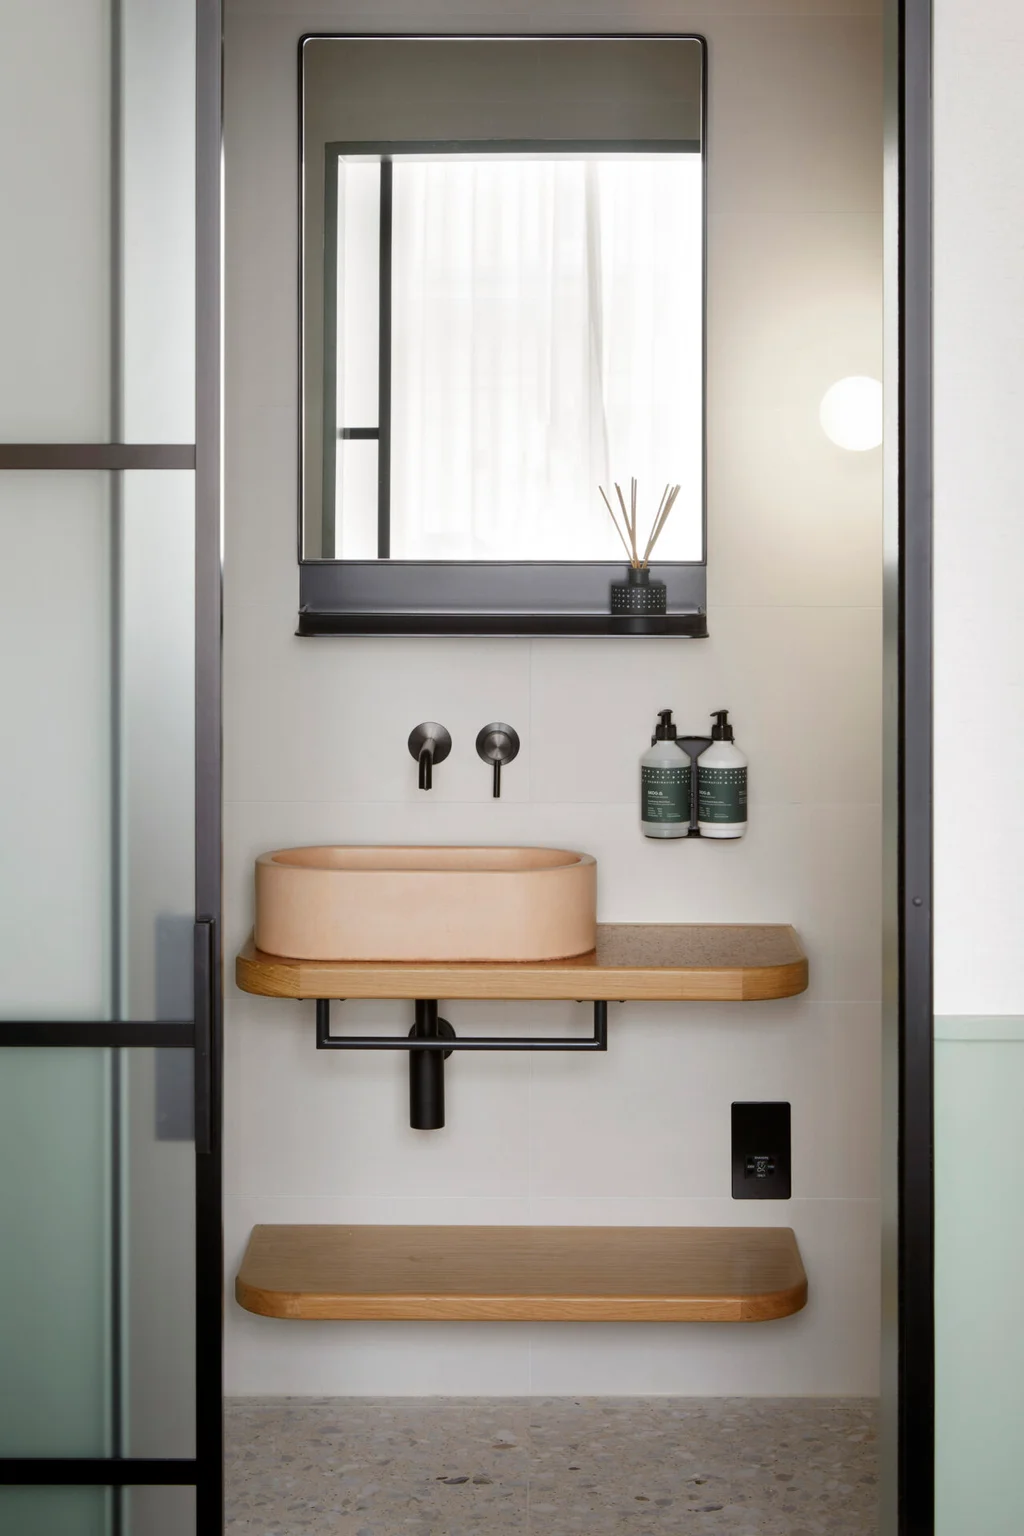 inhabit sustainable bathroom with wall mounted dispenser